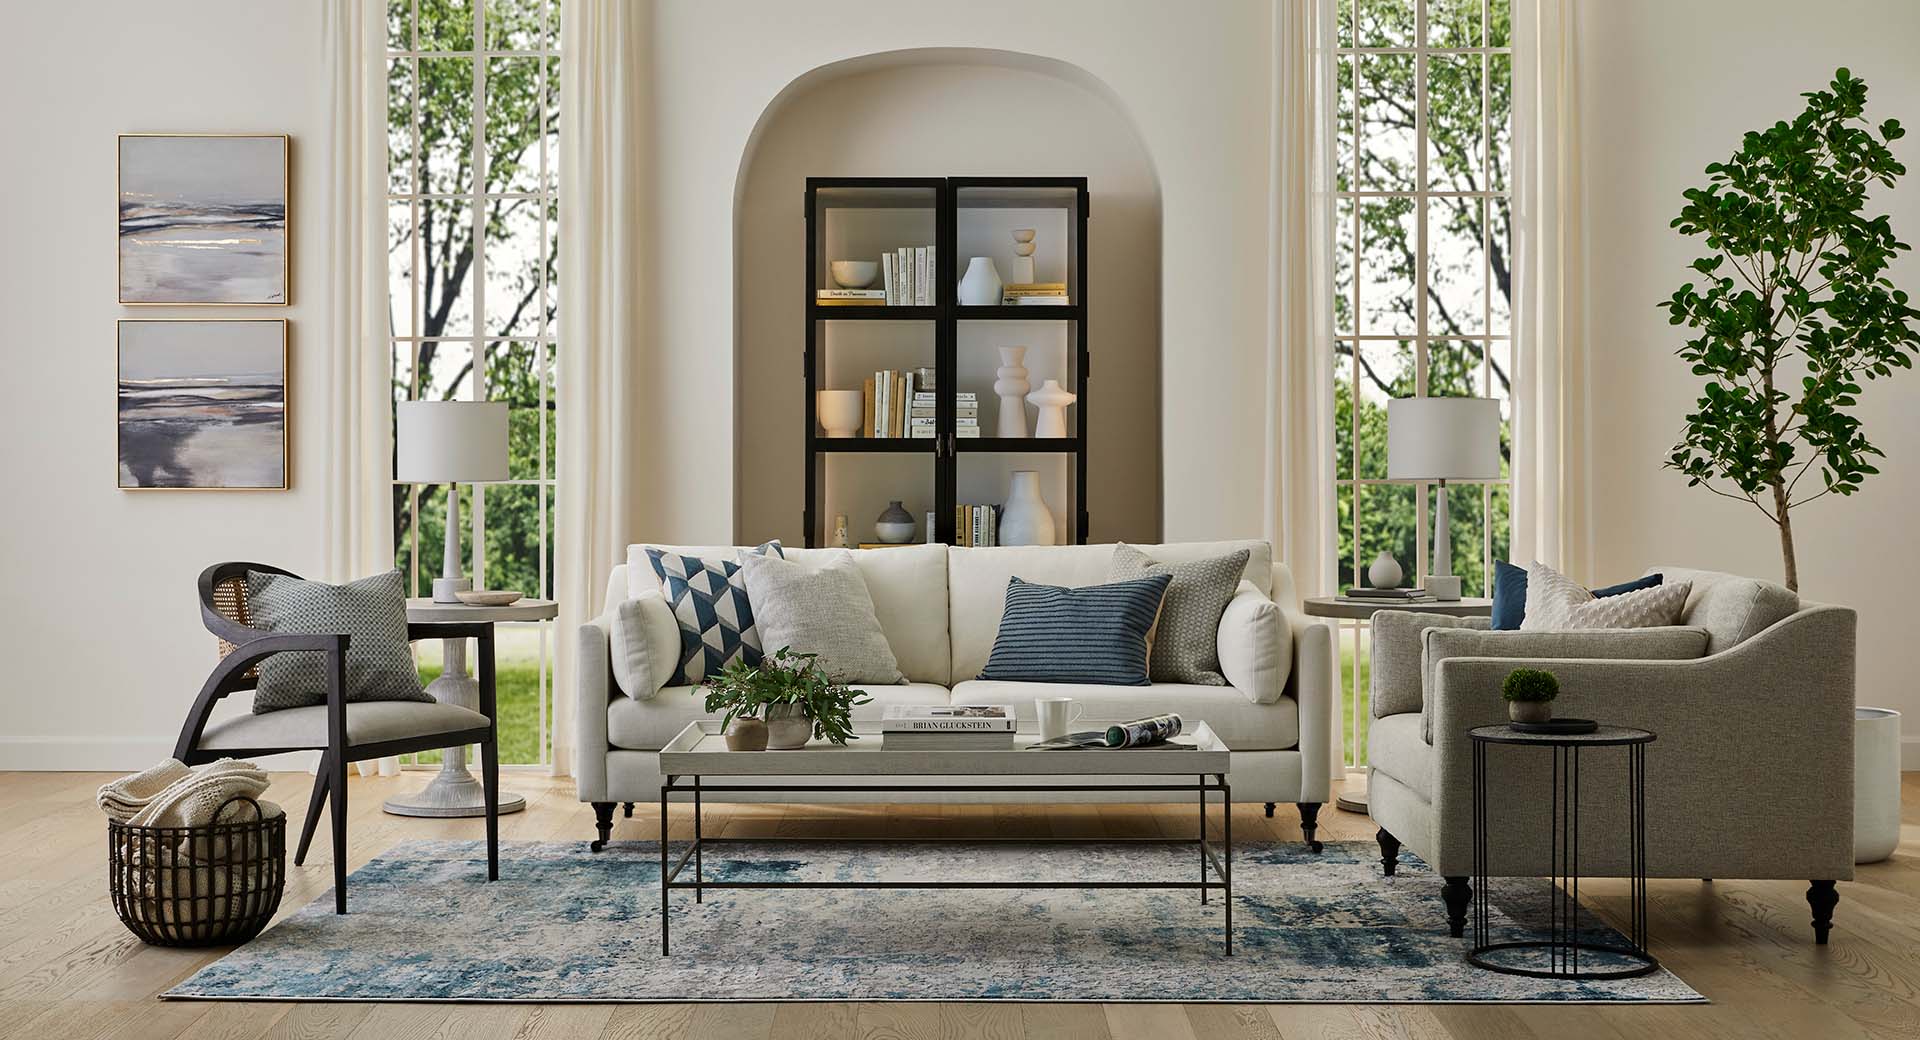 GlucksteinHome living room furniture collection